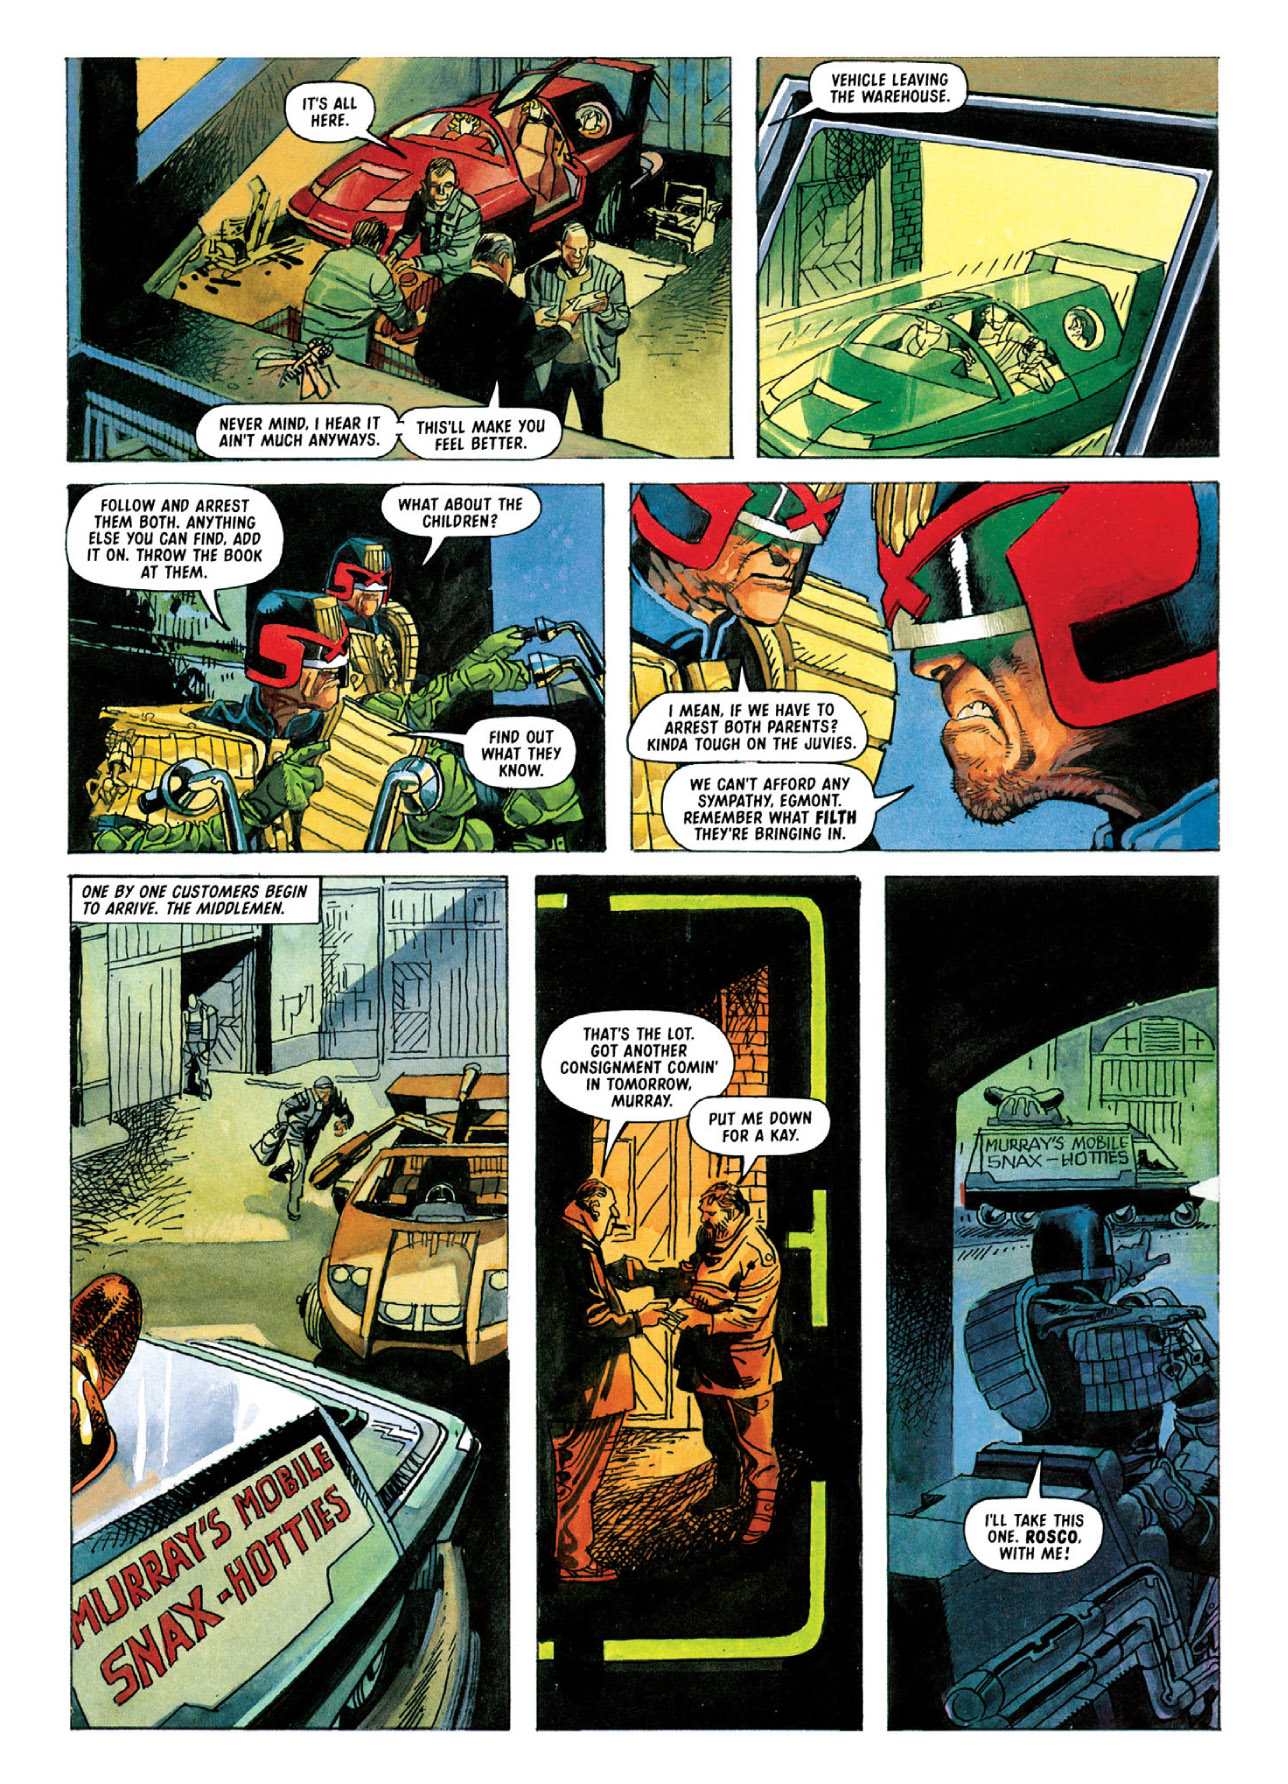 Read online Judge Dredd: The Complete Case Files comic -  Issue # TPB 27 - 8